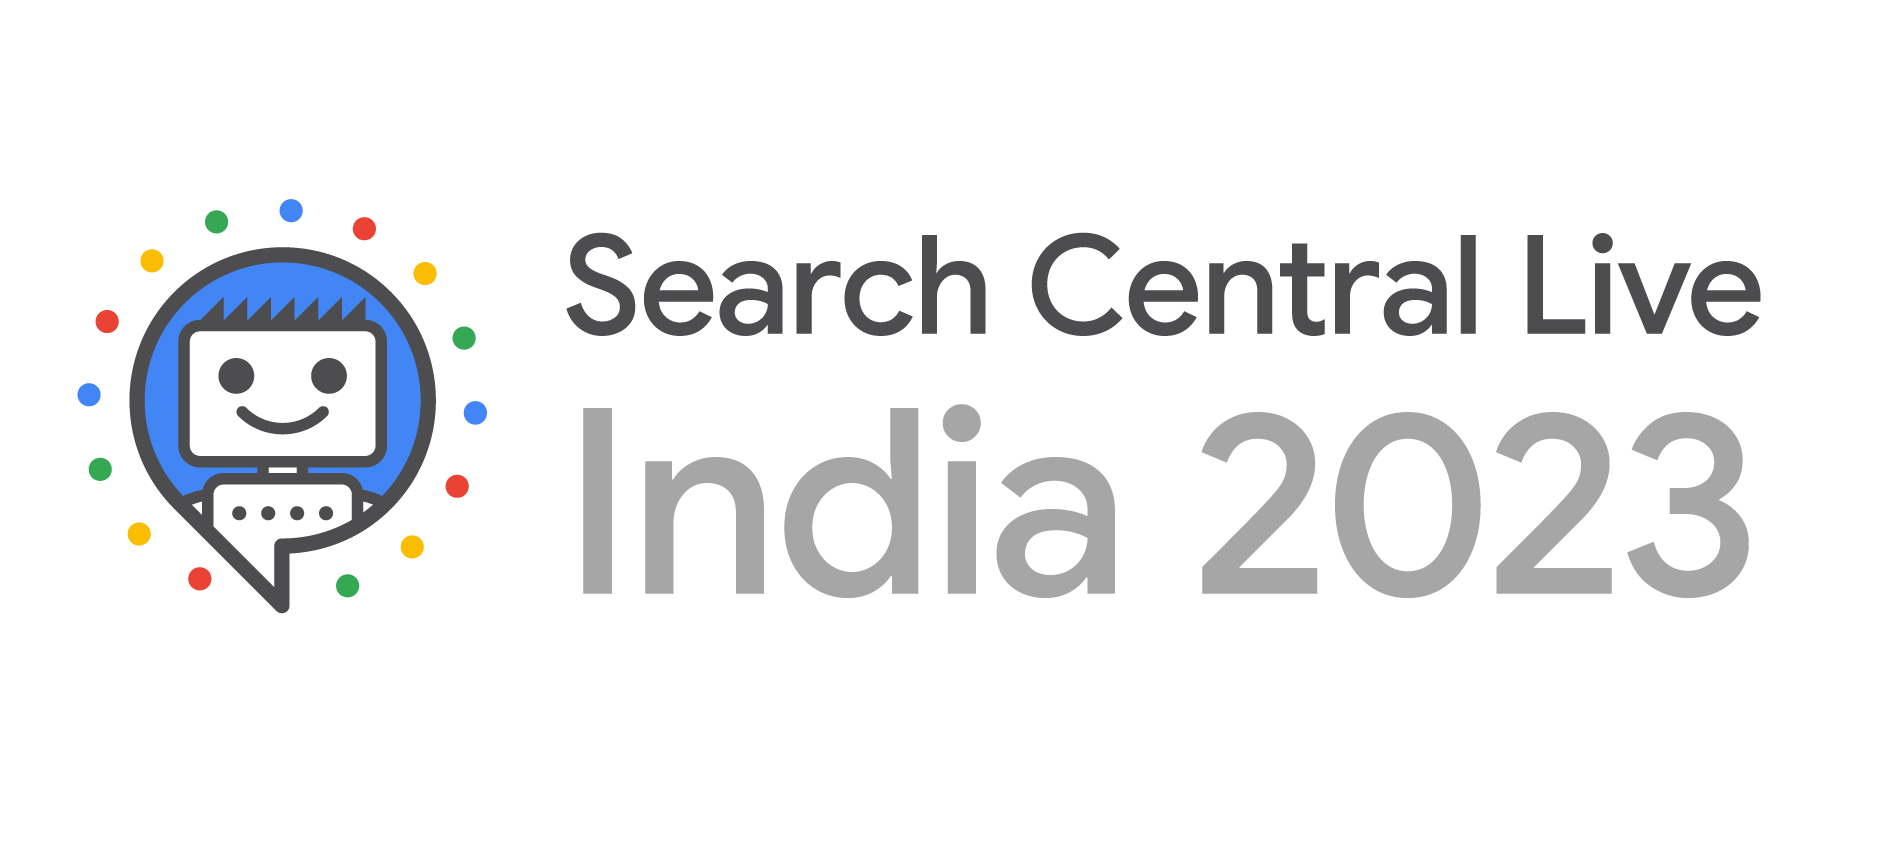 Search Central Live Indie 2023